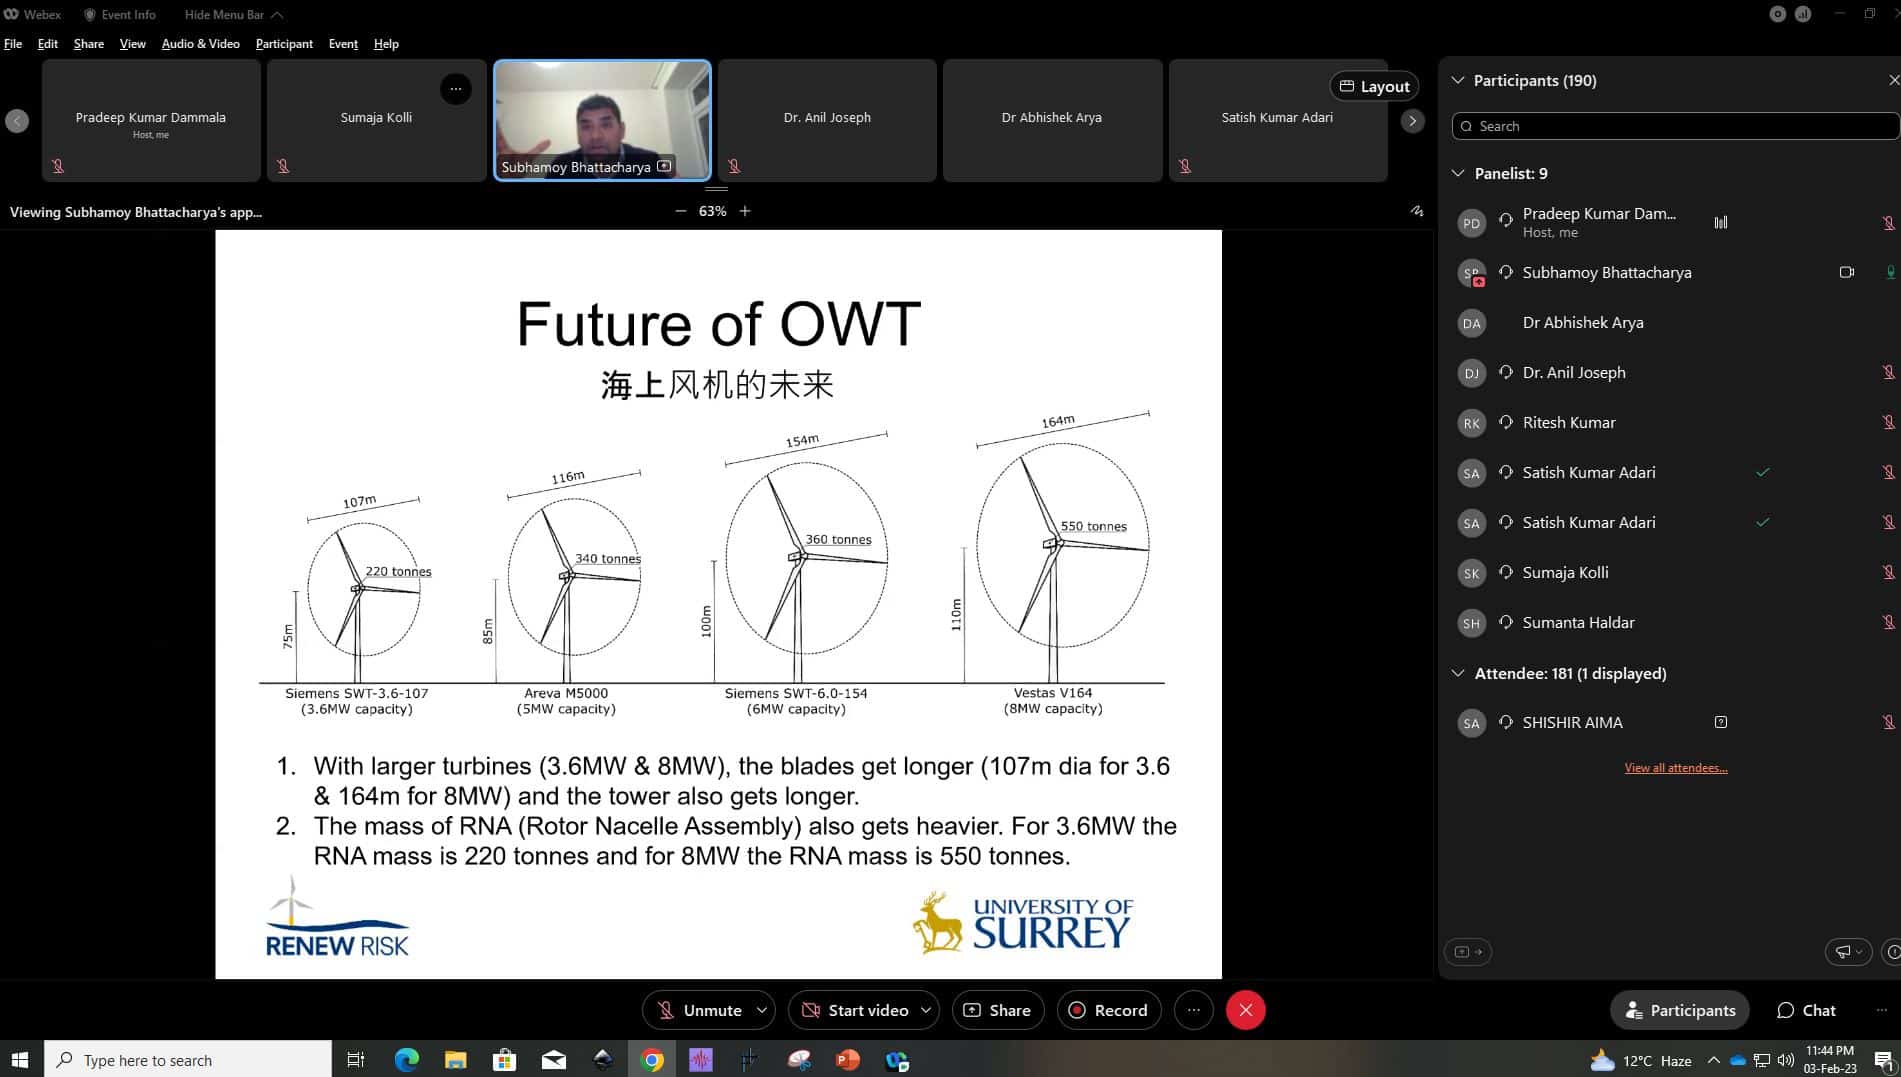 Predicted future growth of Offshore Wind Turbines (OWT).